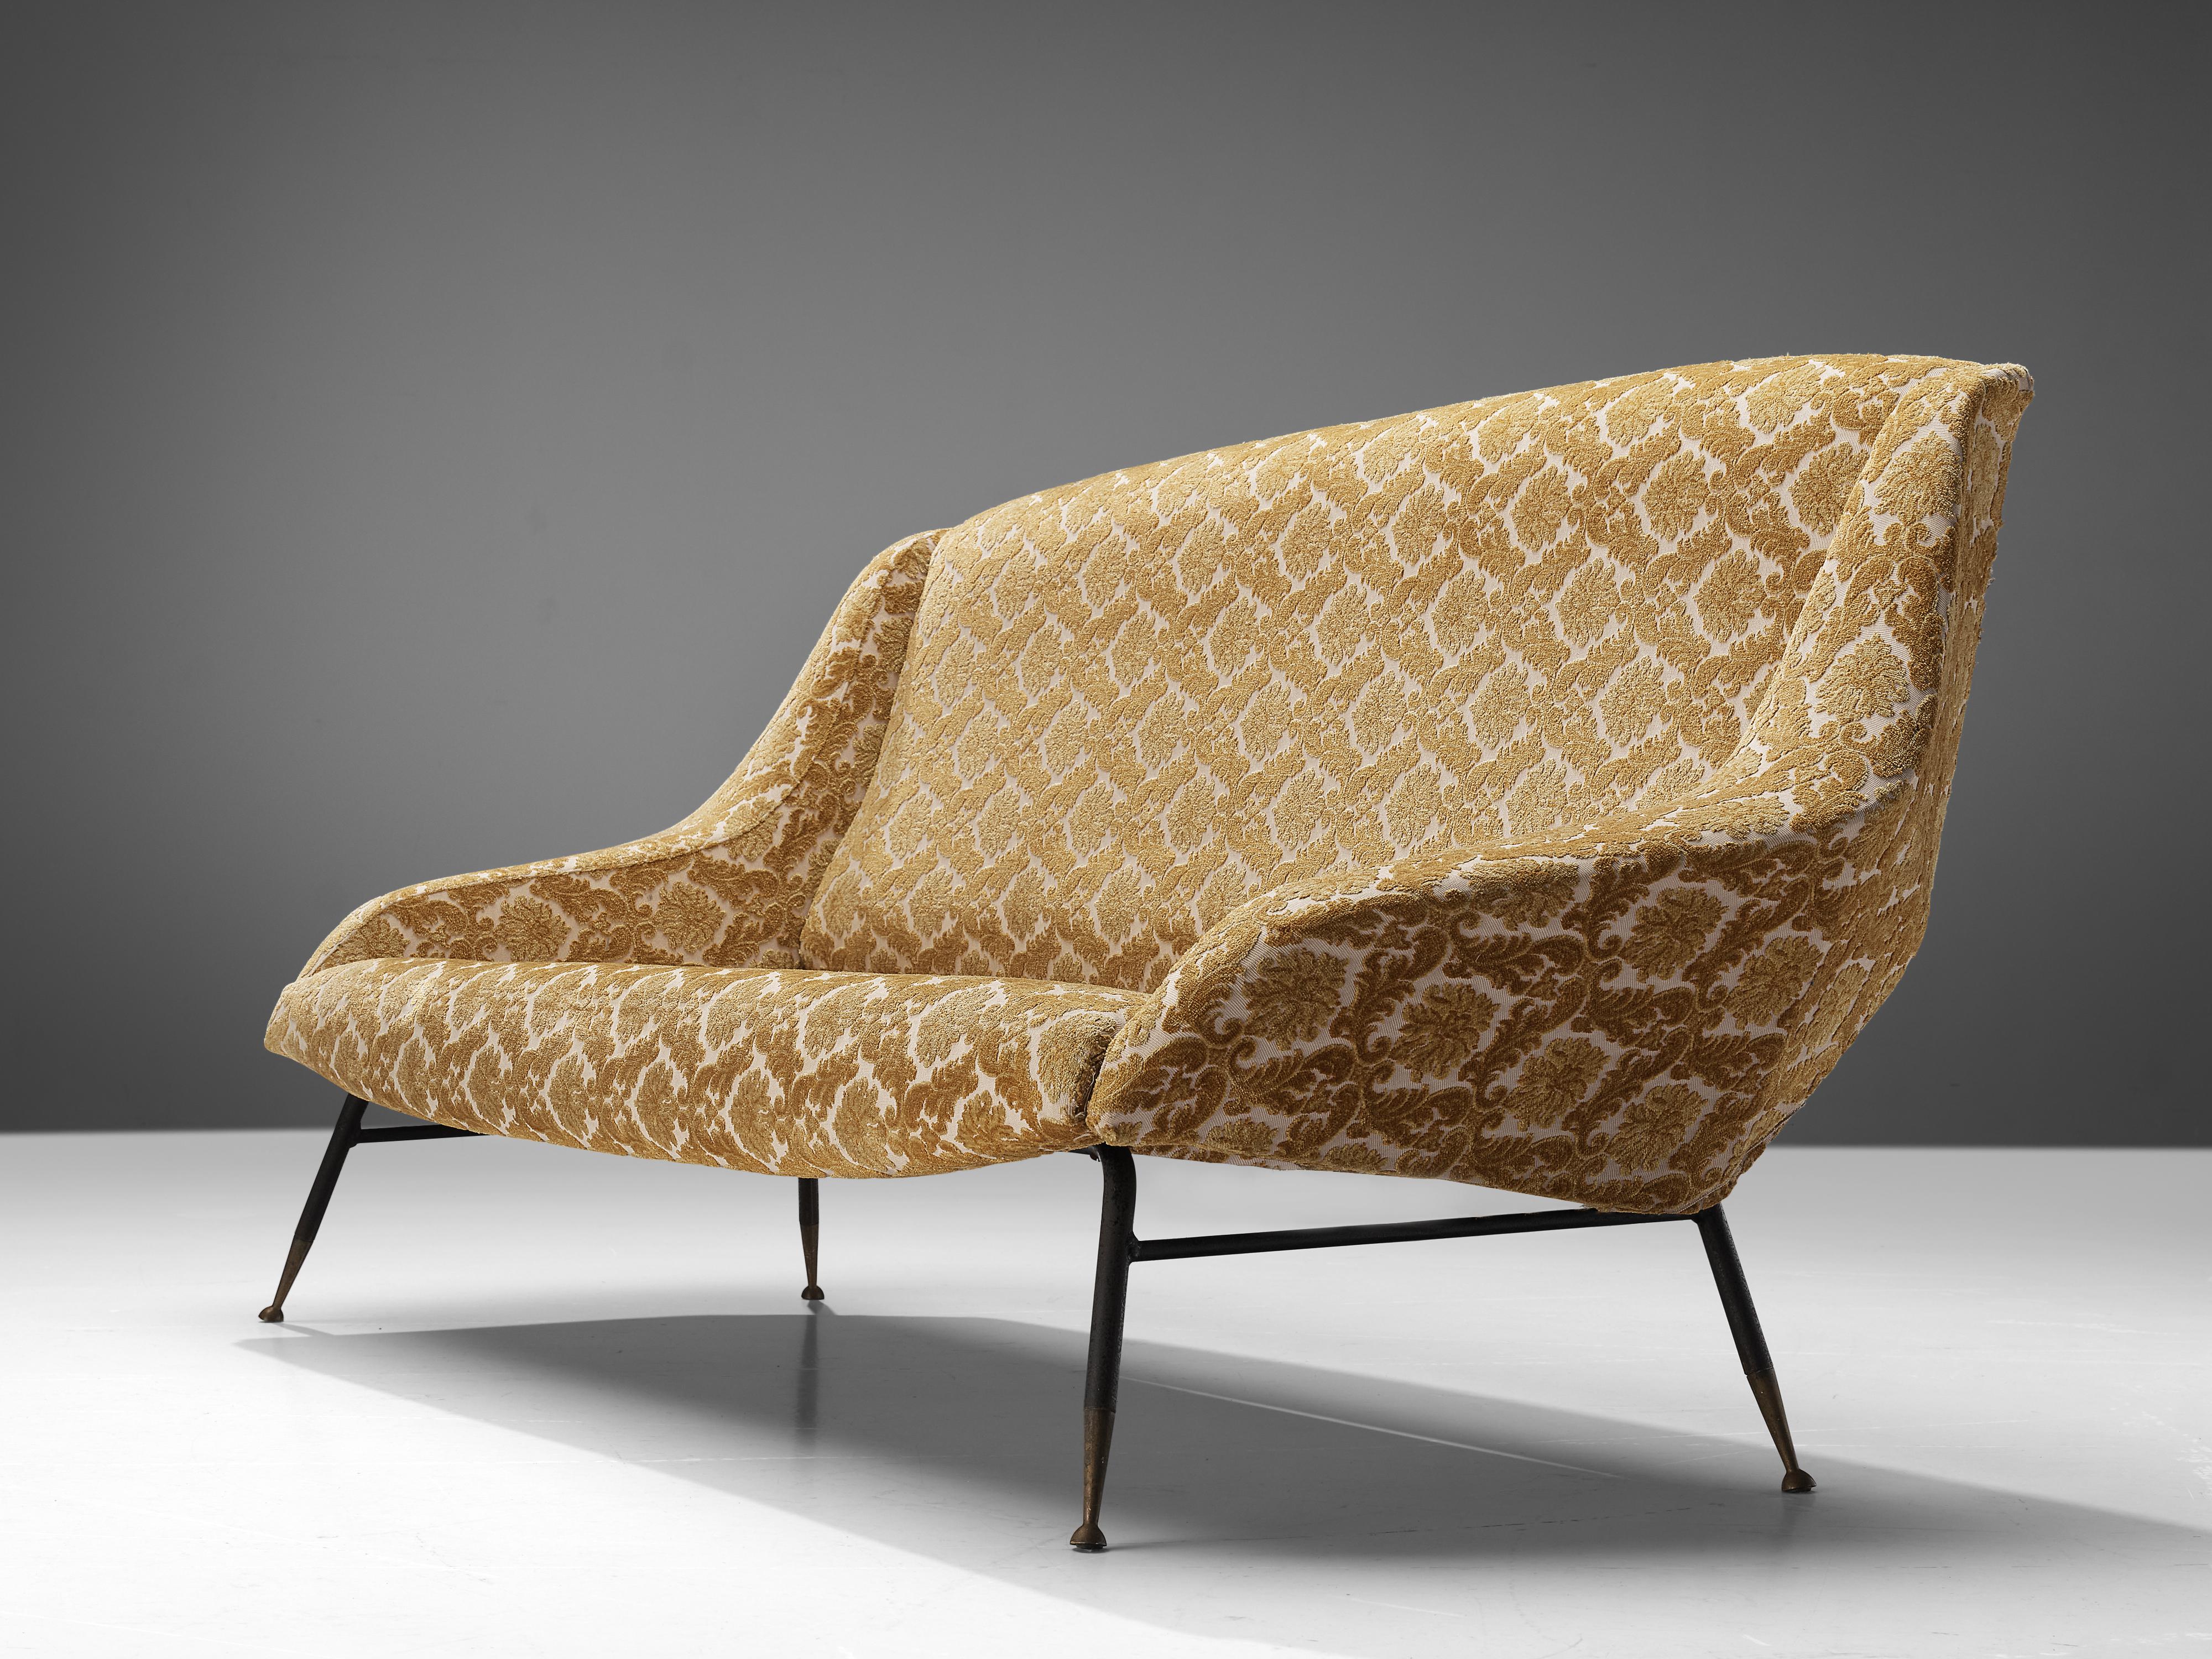 Sofa, brass, metal, fabric, Italy, 1950s 

This sofa was designed in Italy and shows similarities with the designs of Gigi Radice. The sofa is comfortable and has playful details. The sofa bends slightly backwards in order to make the perfect angle